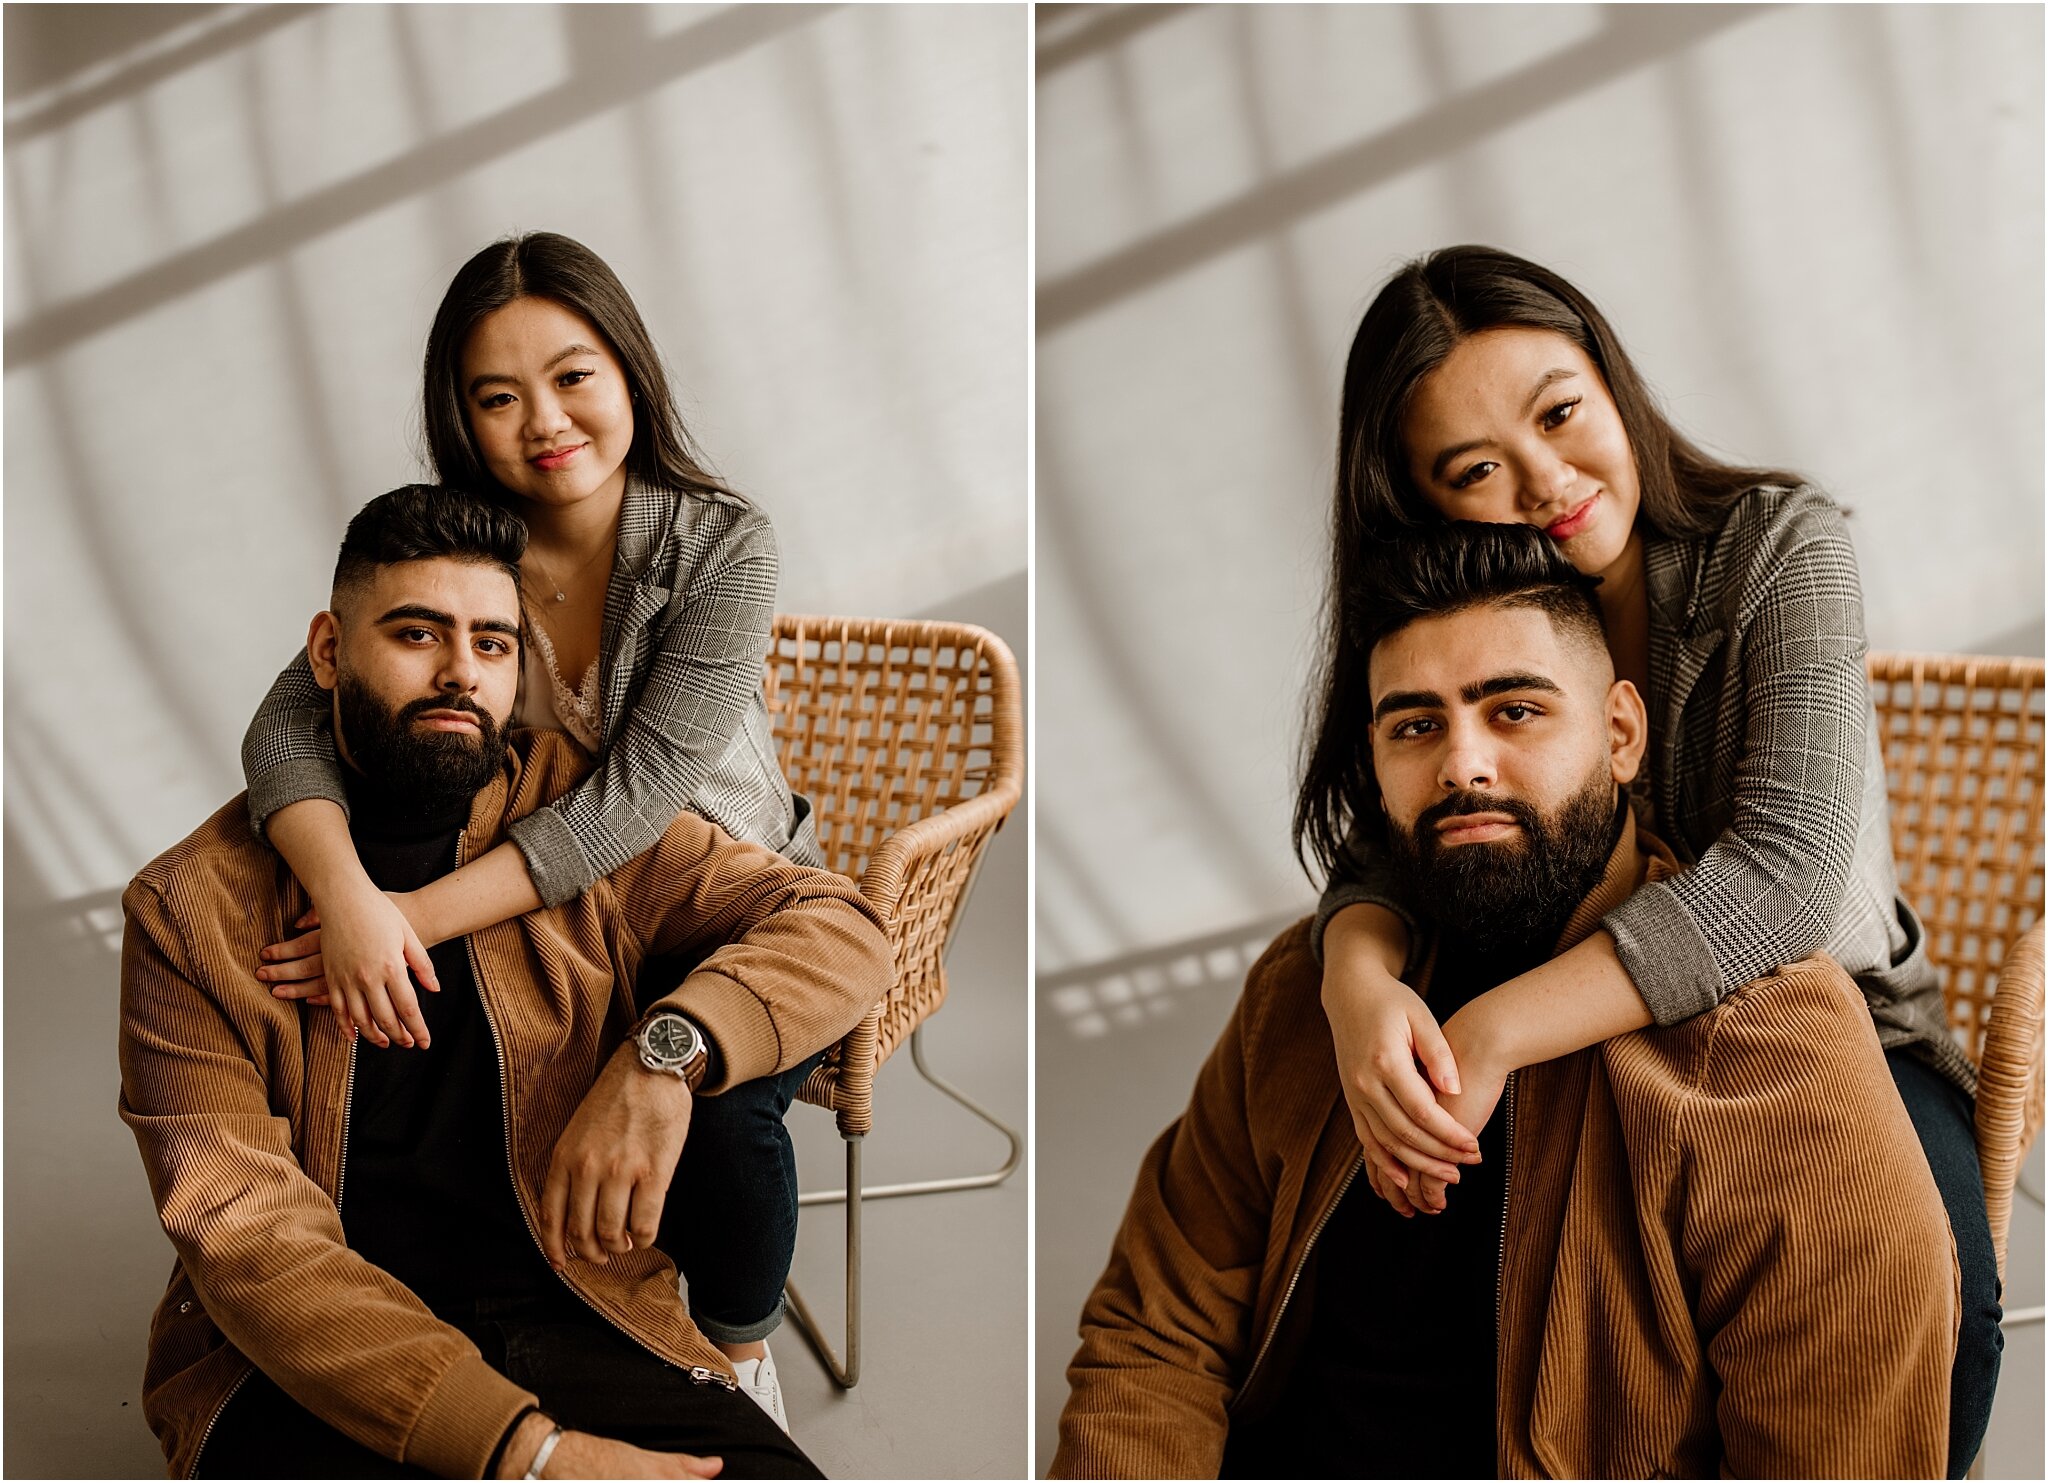 interracial couples portrait in natural light studio in vancouver